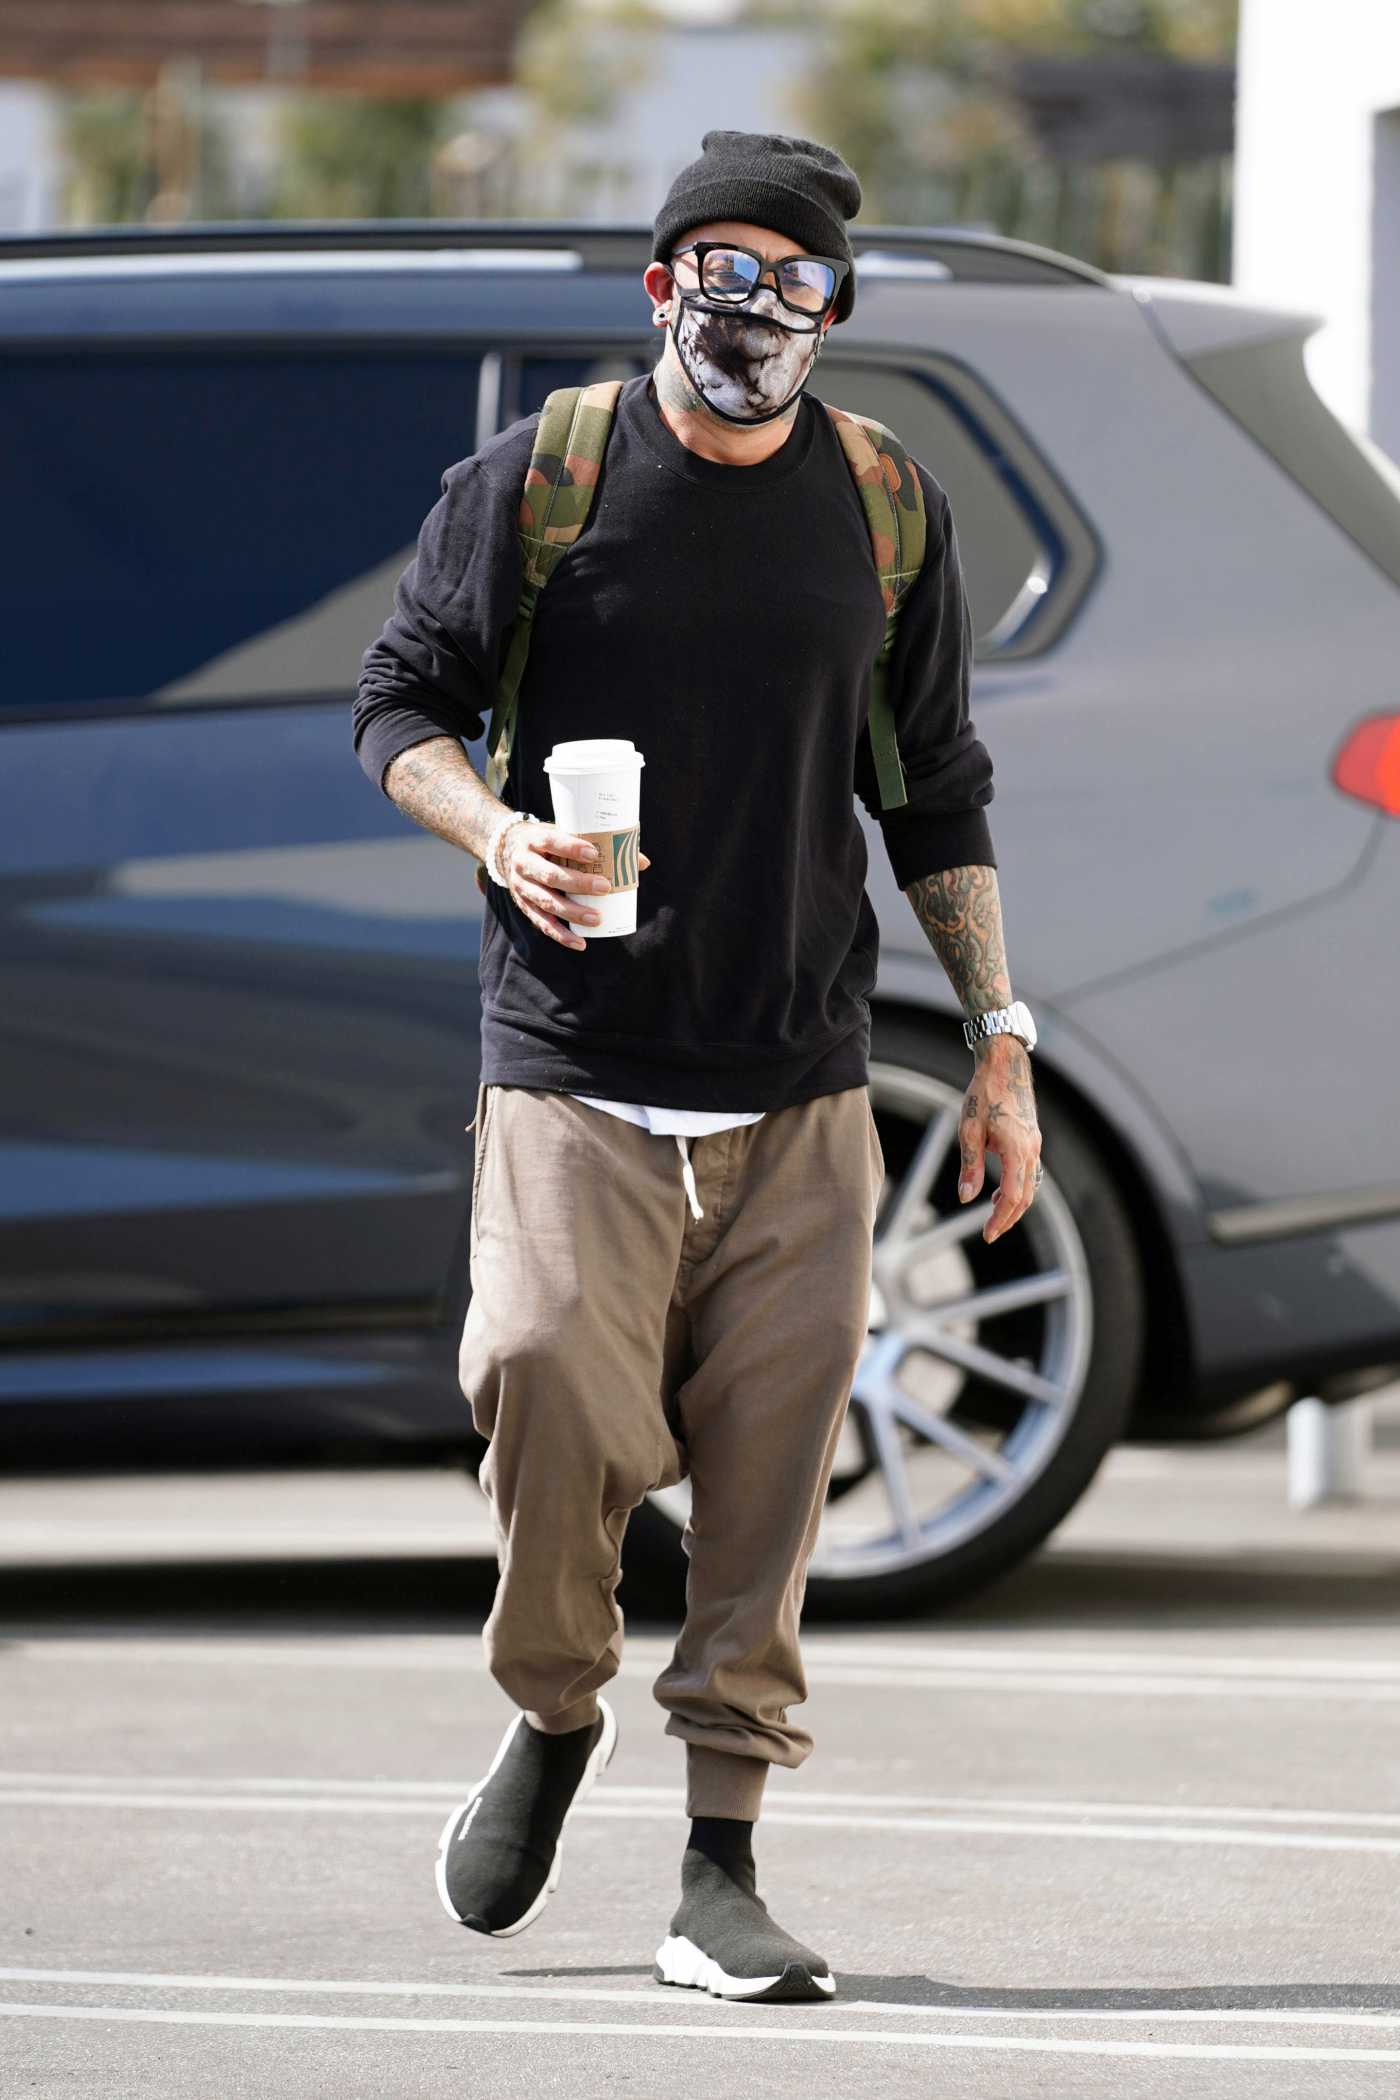 AJ McLean in a Black Knit Hat Heads to the DWTS Studio in Los Angeles 10/07/2020